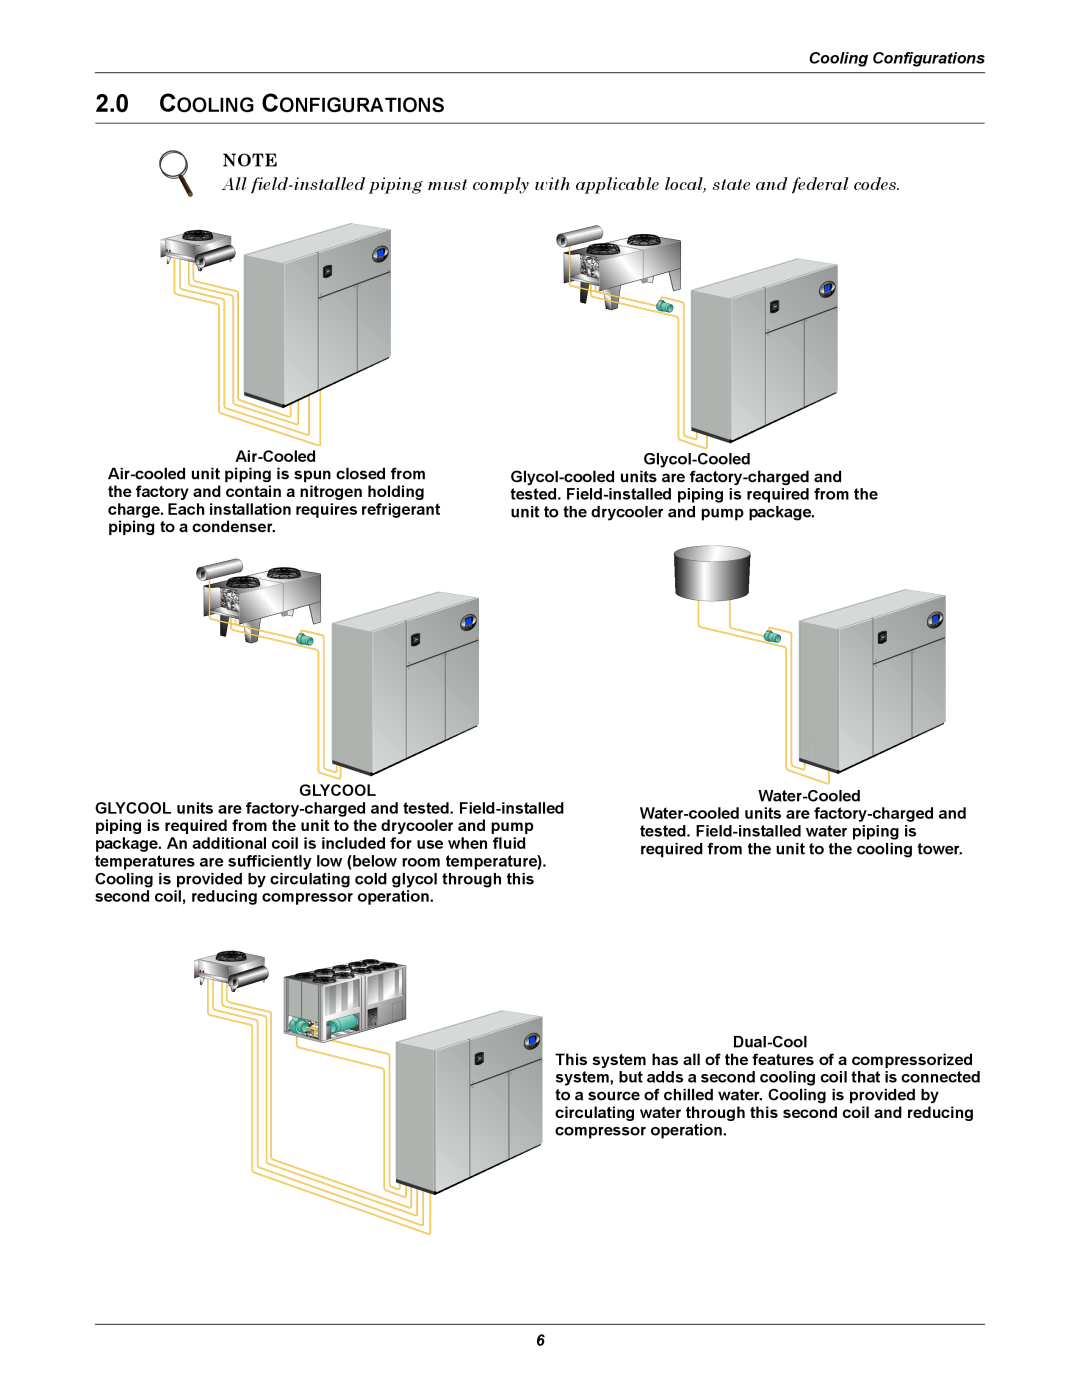 Liebert DS user manual Cooling Configurations, Air-Cooled, Glycol-Cooled, Glycool, Water-Cooled, Dual-Cool 